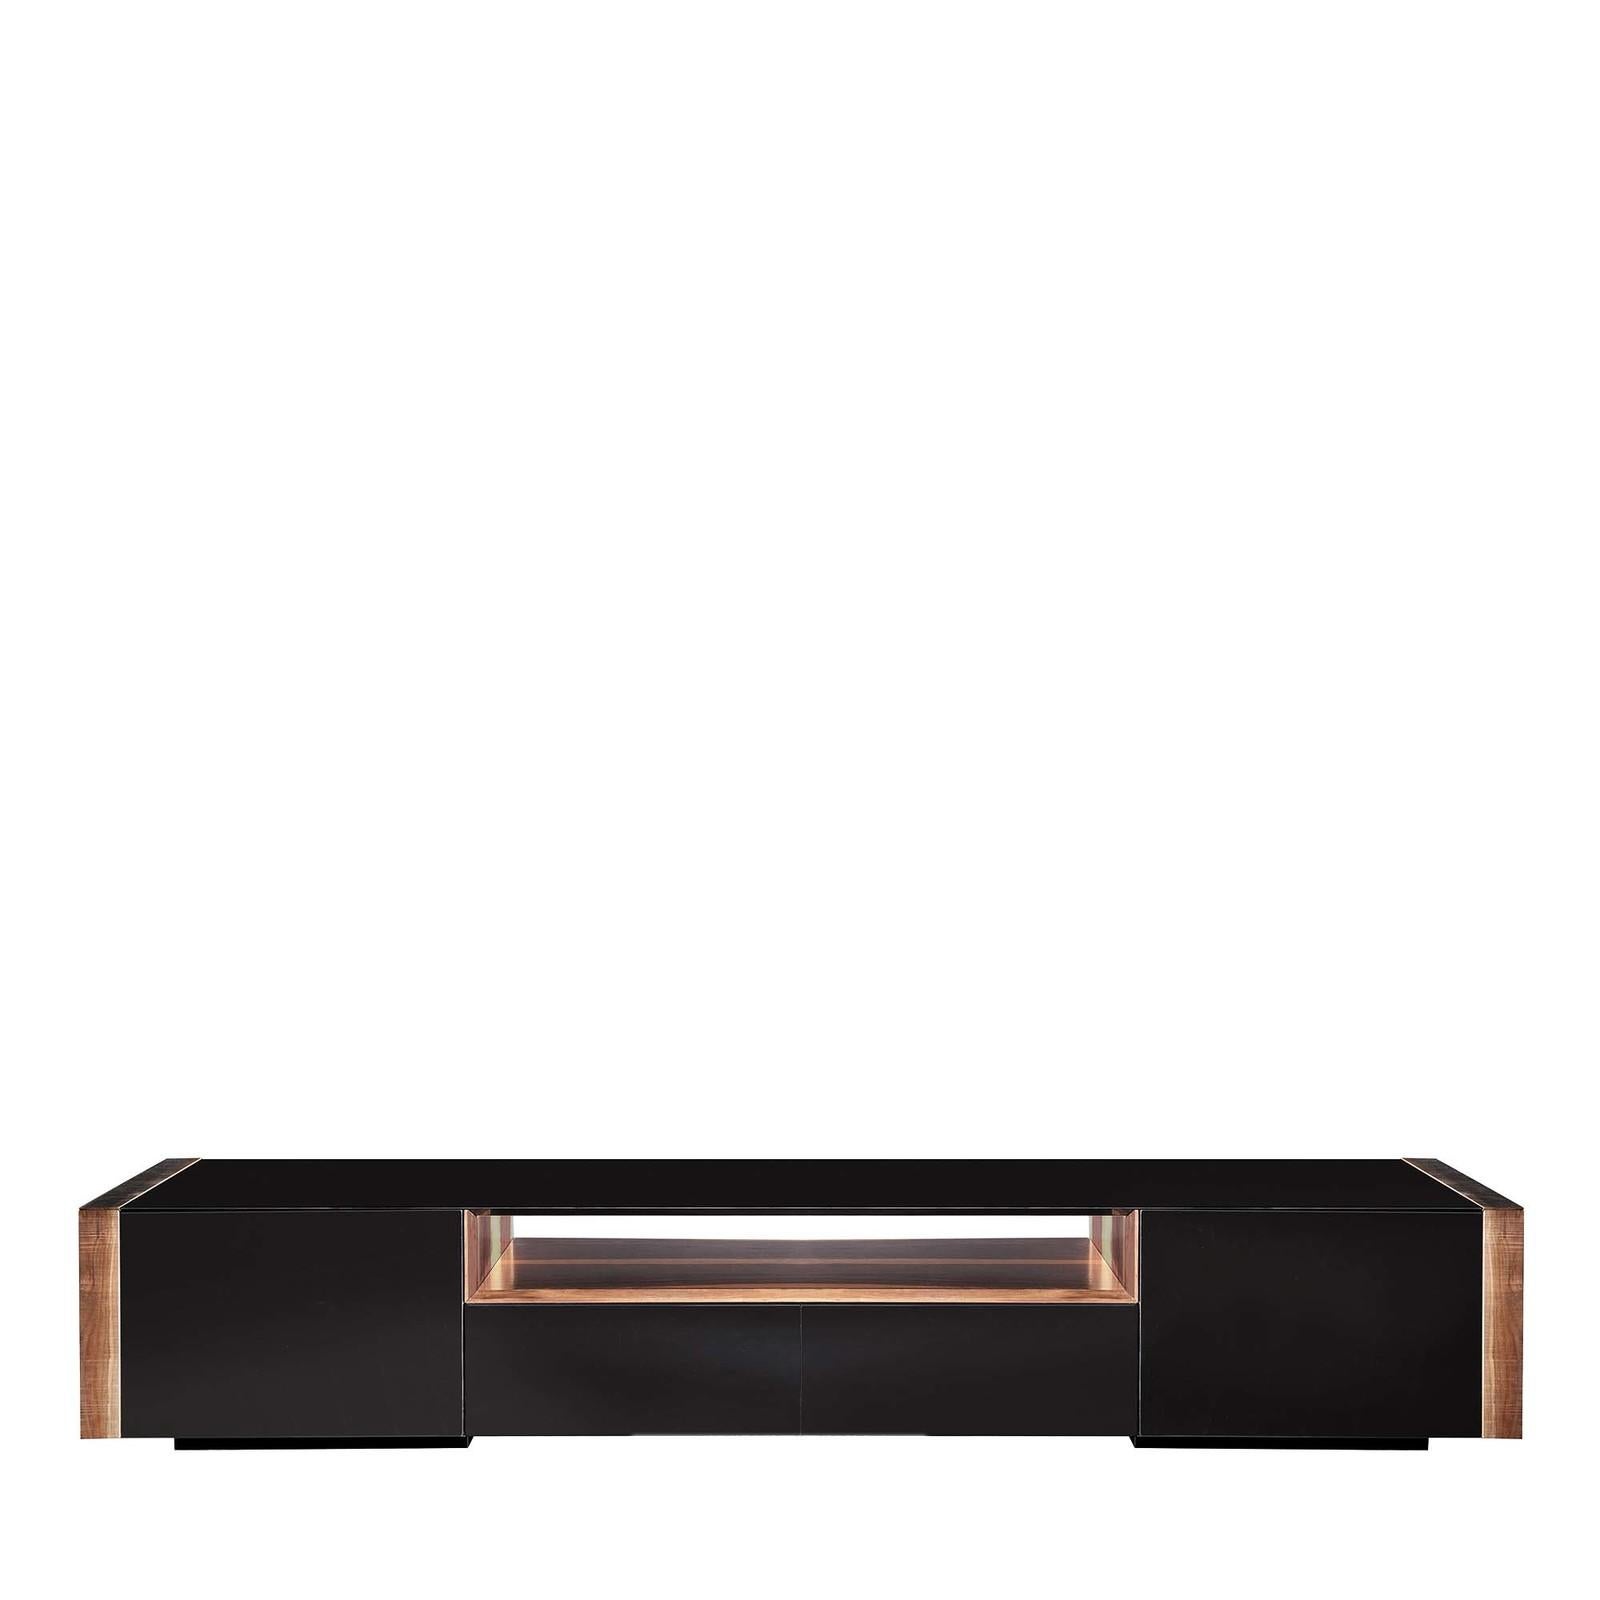 The lean and essential silhouette of this media cabinet displays its modern elegance and functionality in a perfect blend of colors and textures. Finished with a glossy black polyurethane lacquer, this cabinet is enriched with warm details in